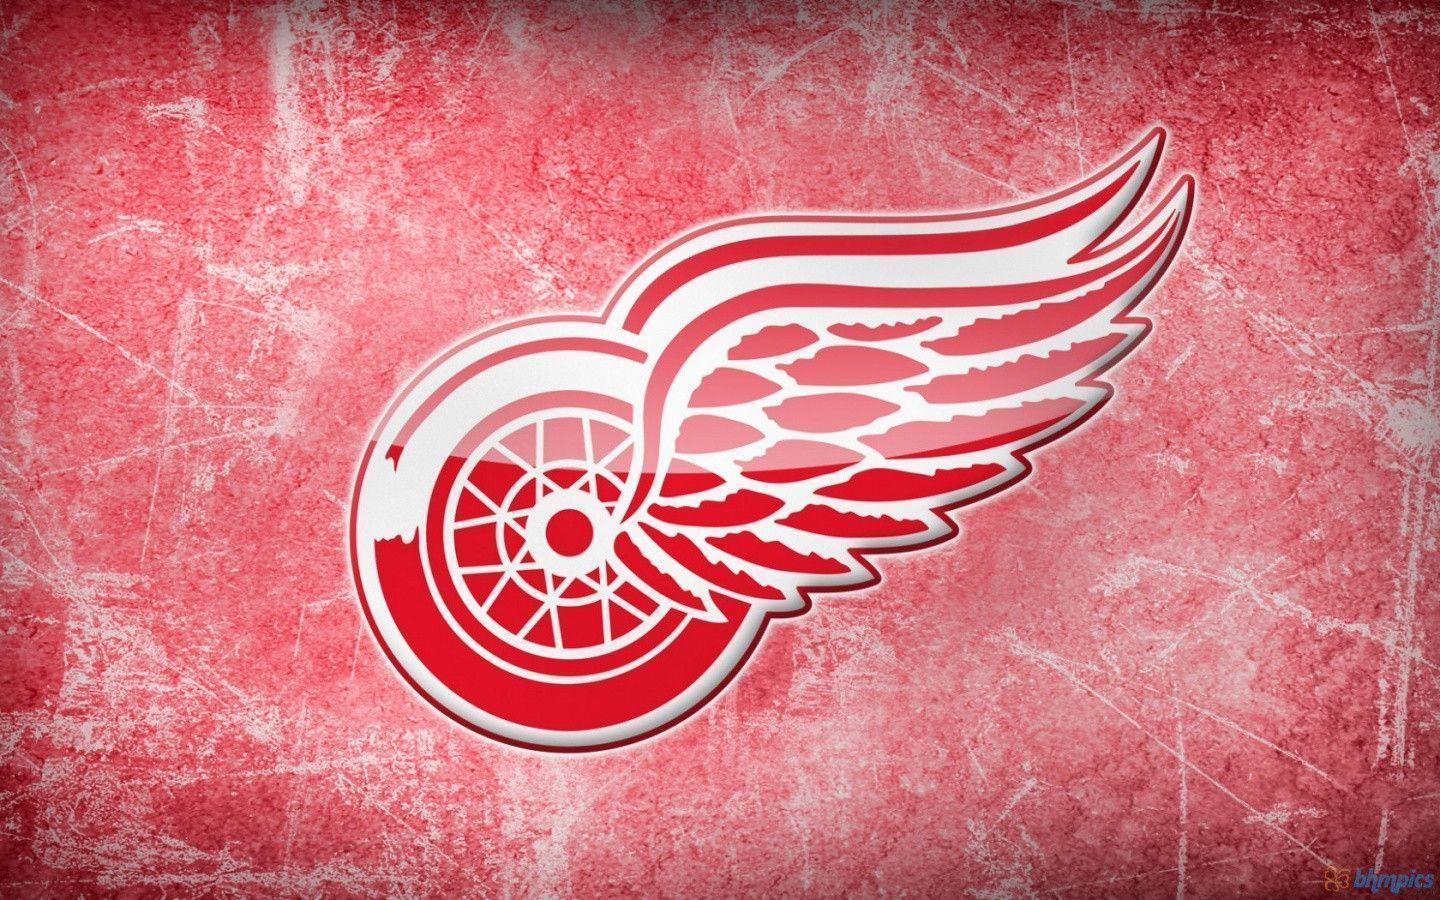 Detroit Red Wings wallpaper. Detroit Red Wings background